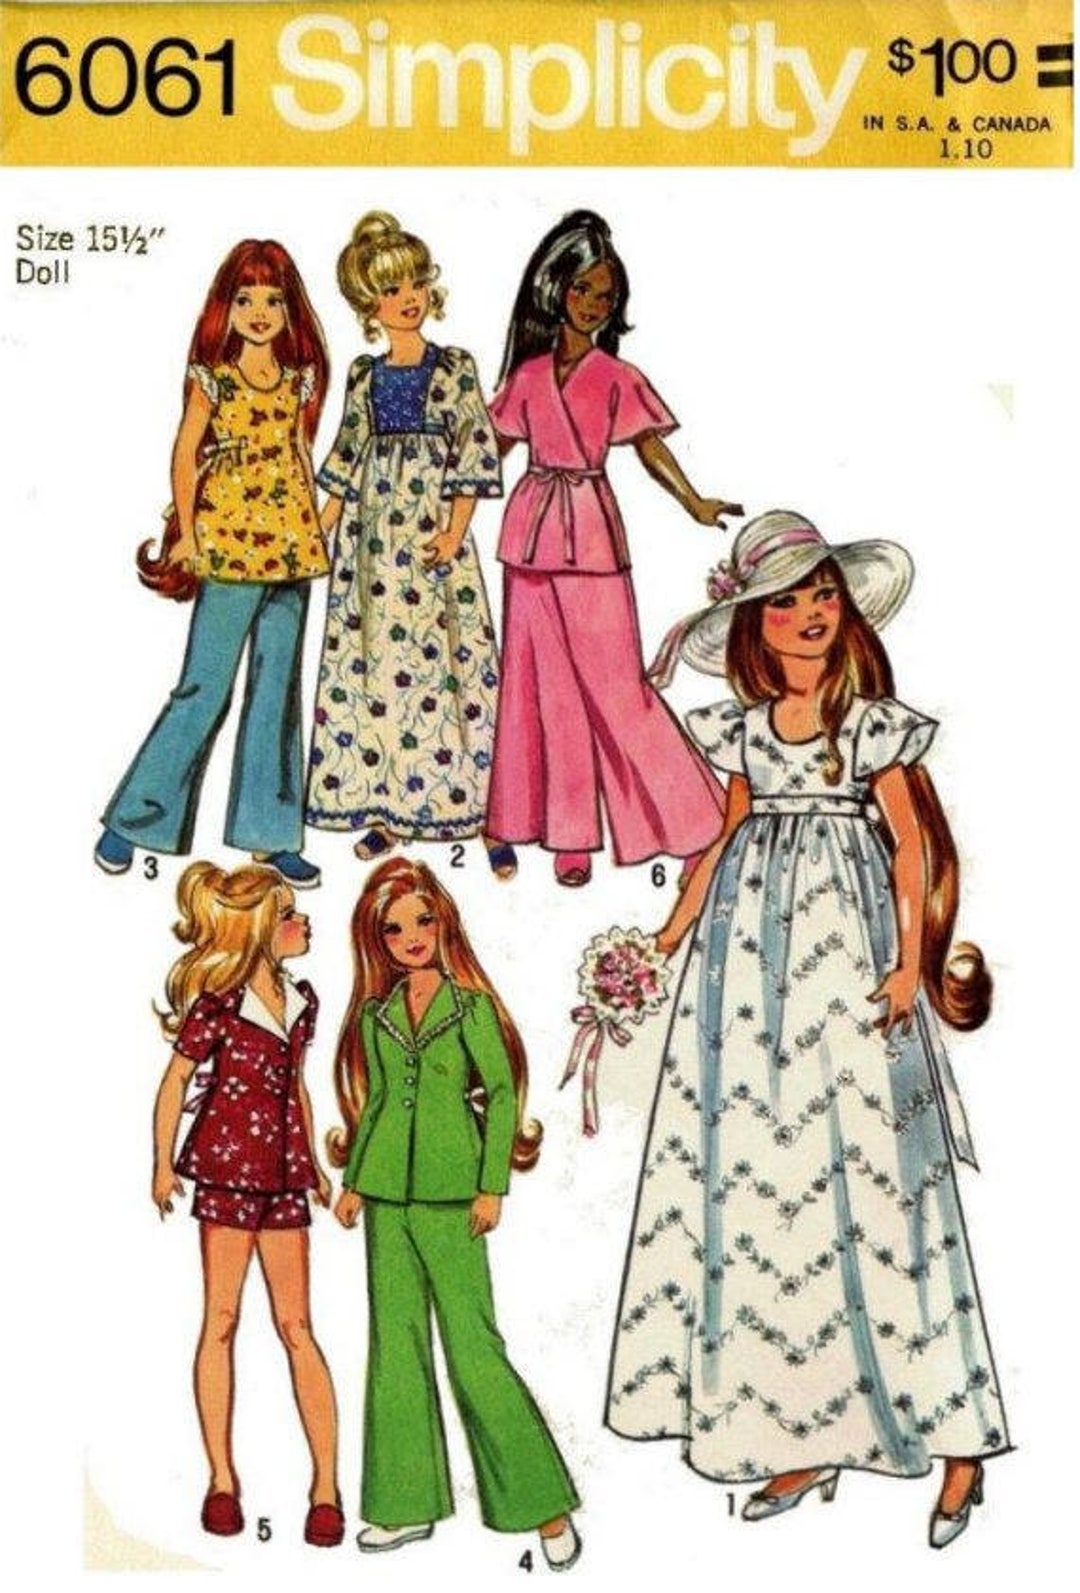 E710 Copy of Vintage 1972 Simplicity Doll Clothes Pattern 6061 for